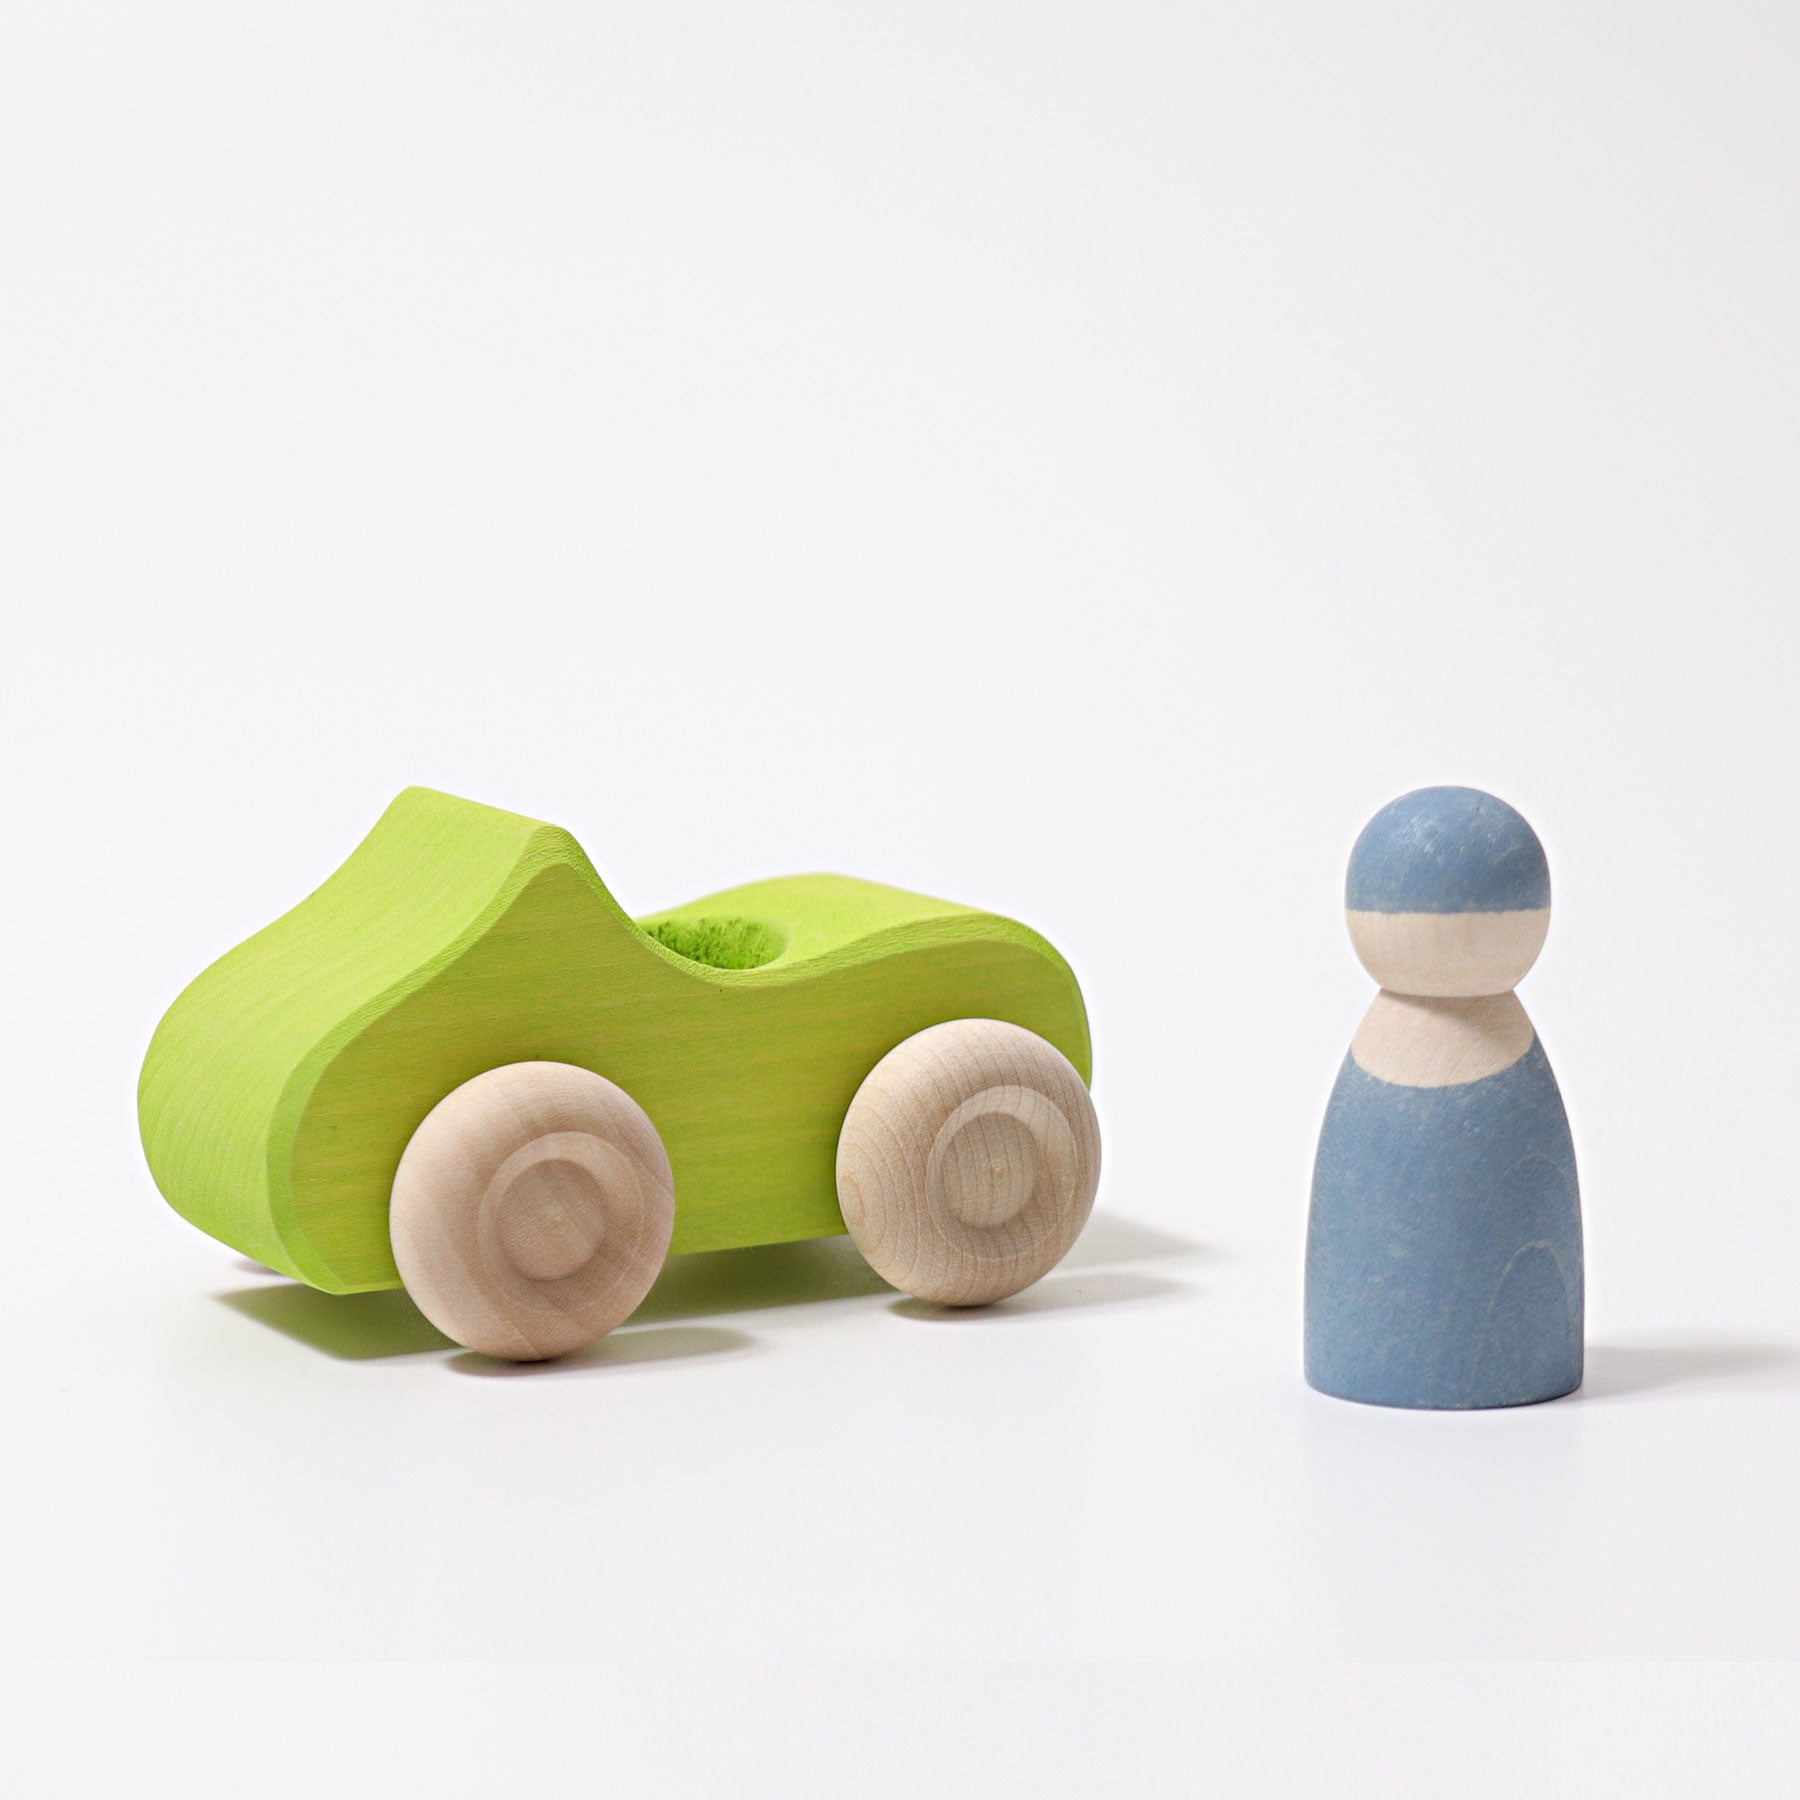 Small Green wooden Convertible Car next to a blue wooden peg doll on a white background.